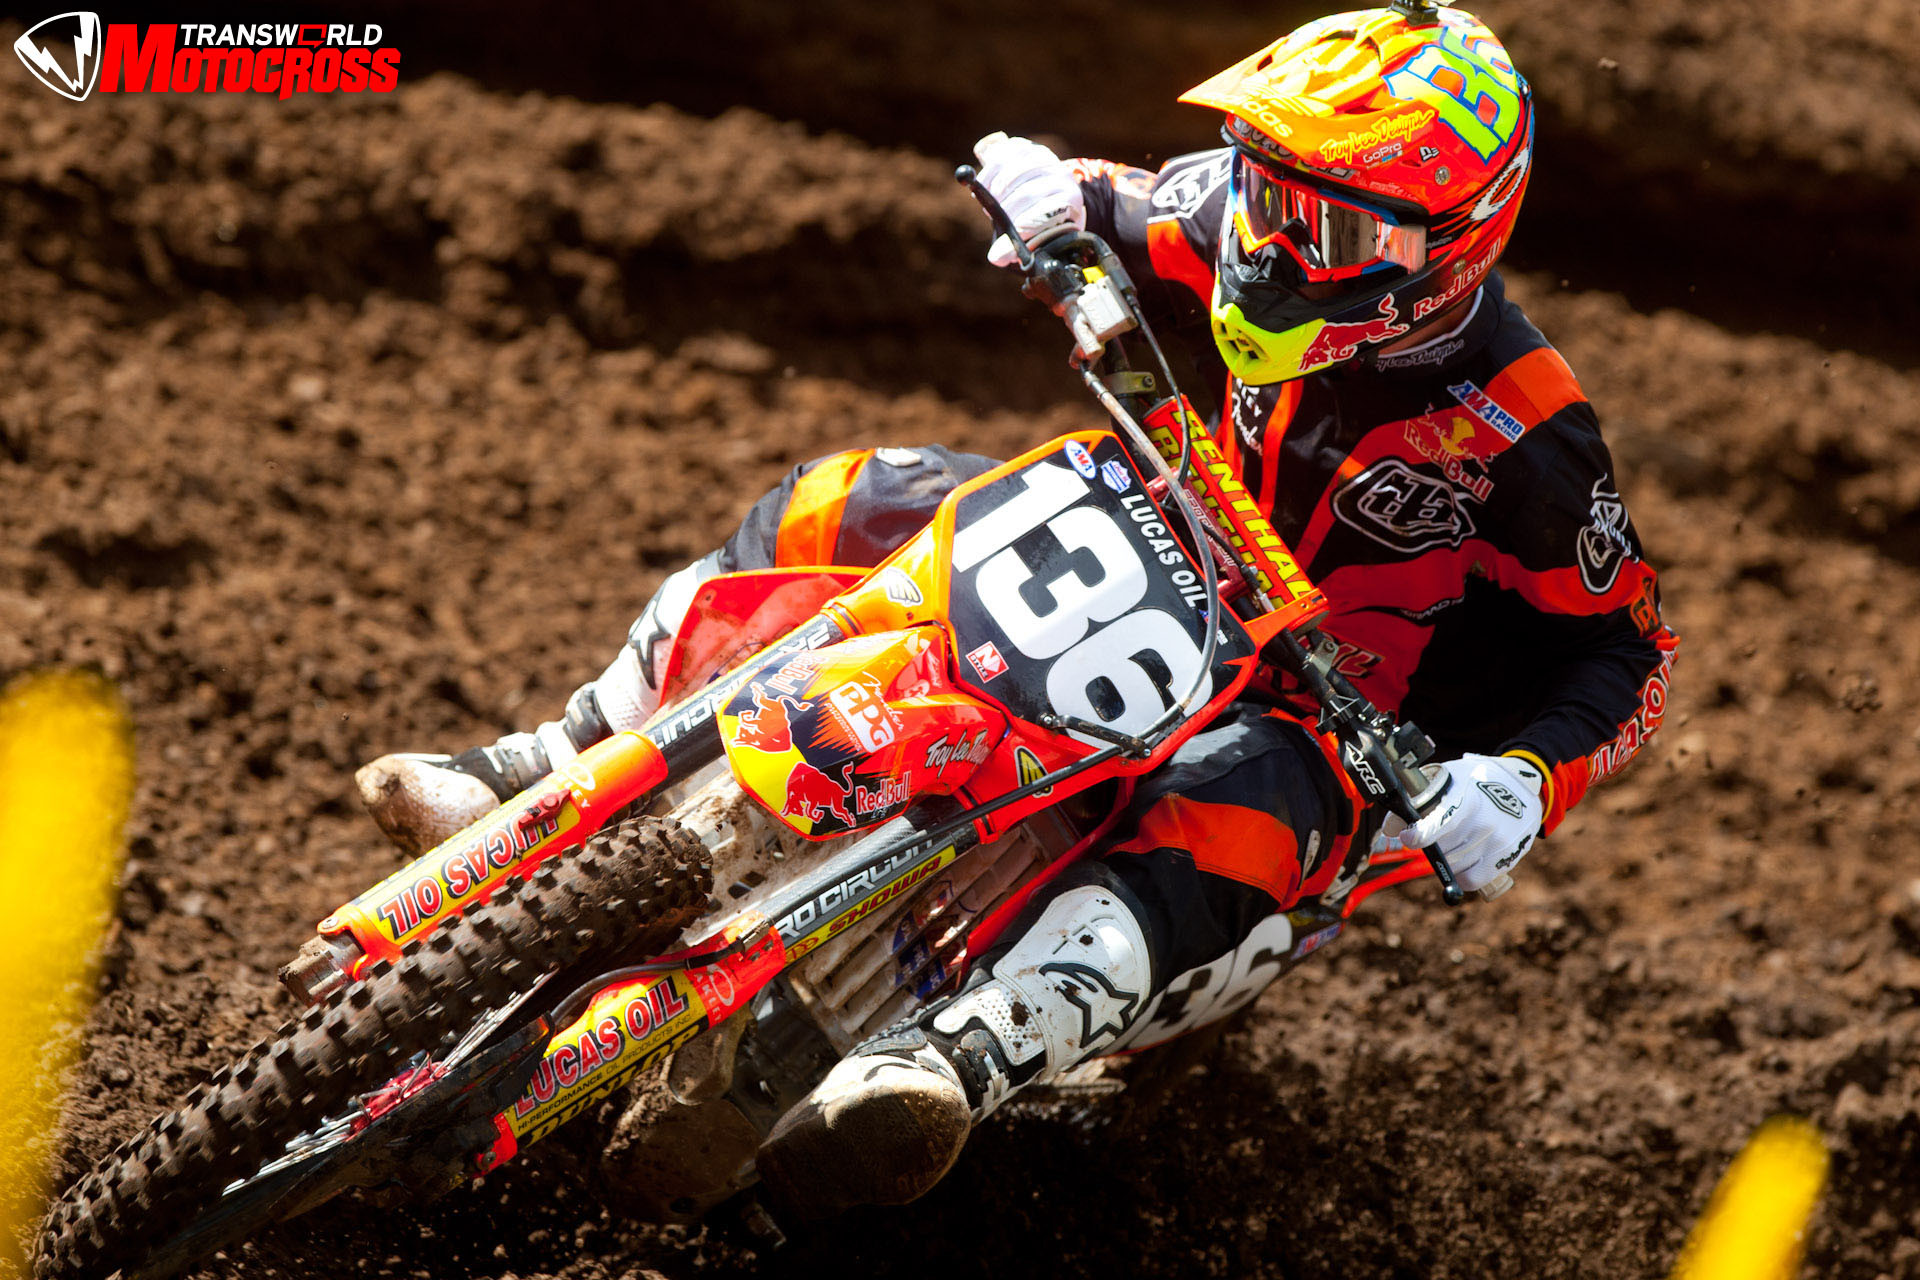 1920x1280 HD Motocross Wallpapers and Photos HD Bikes Wallpapers Imagenes De Motocross  Wallpapers Wallpapers)